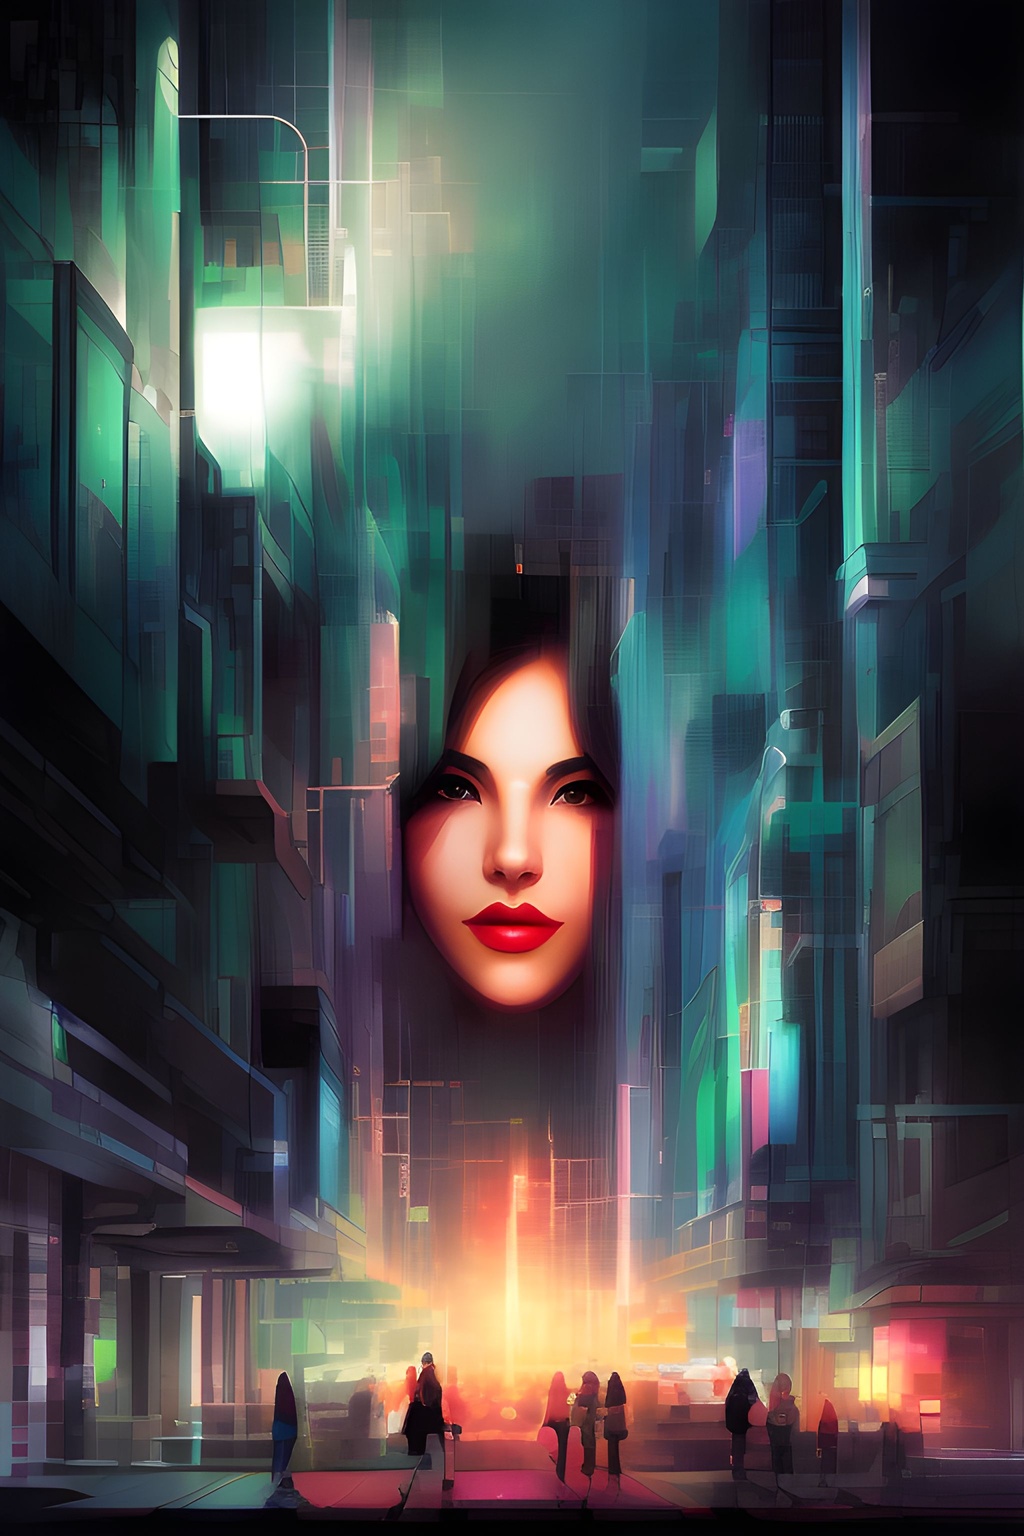 Prompt: Cyberpunk city, abstract art muted colors, shadows, cartoon style, attractive women